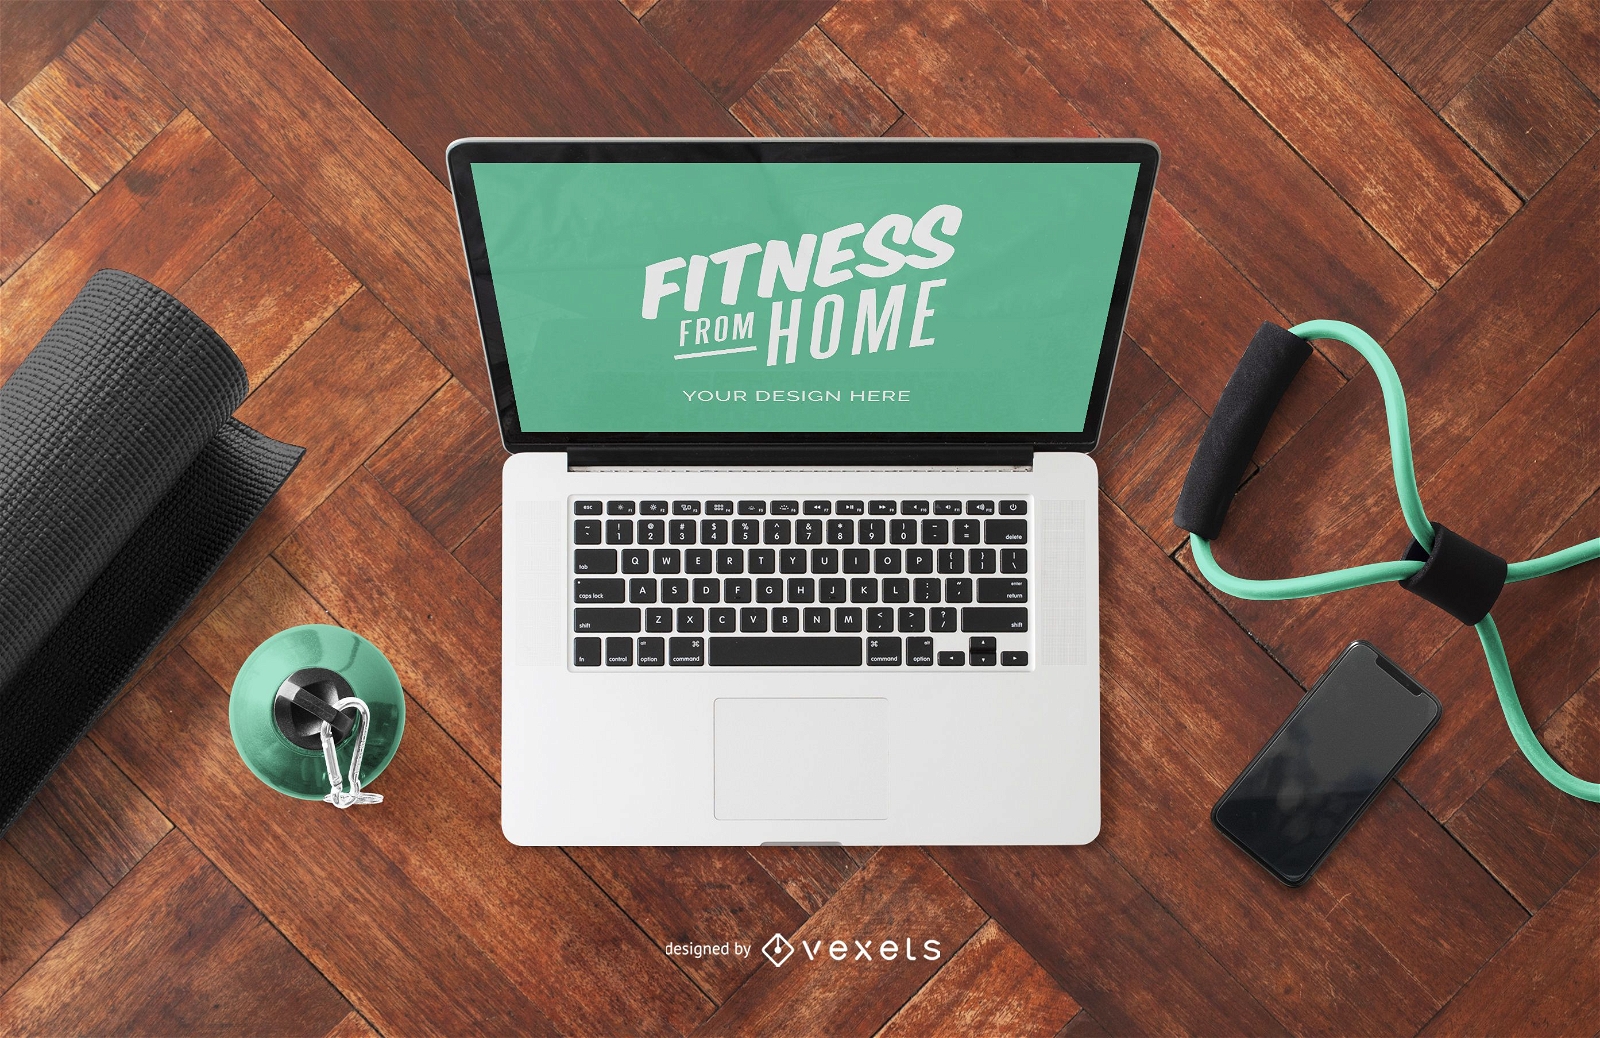 Fitness from home laptop mockup